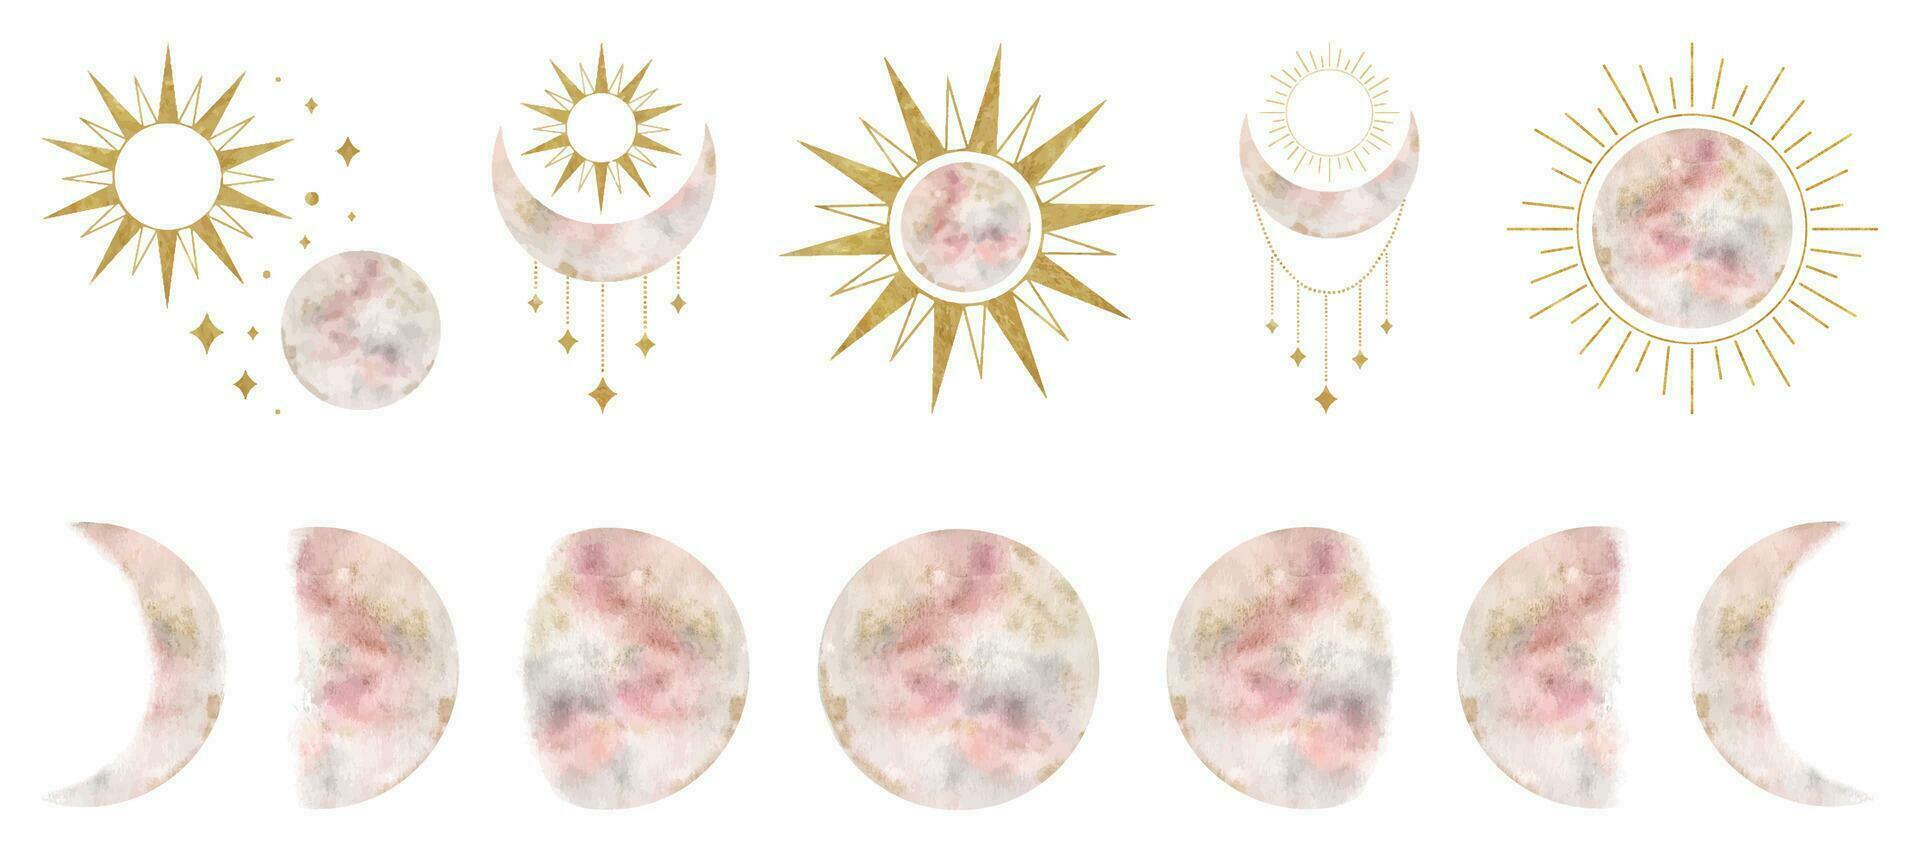 Set of crescent moon, sun, floral elements. Moon, sun and. Isolated watercolor illustration on the topic of astrology and esotericism. Magic celestial clipart for design, print, fabric or background vector